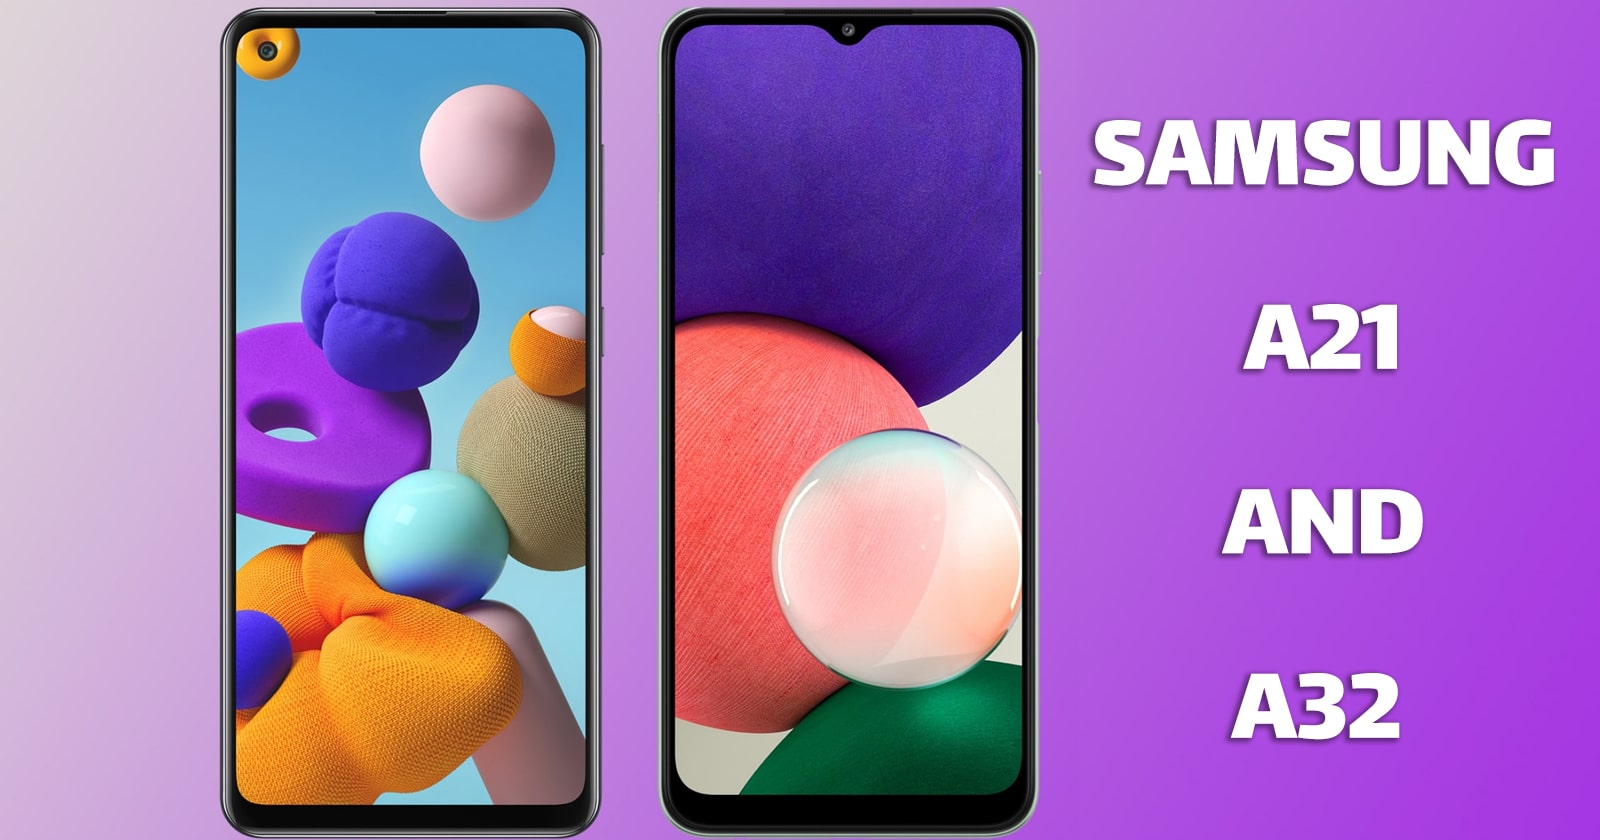 What Is the Difference Between Samsung A21 and A32